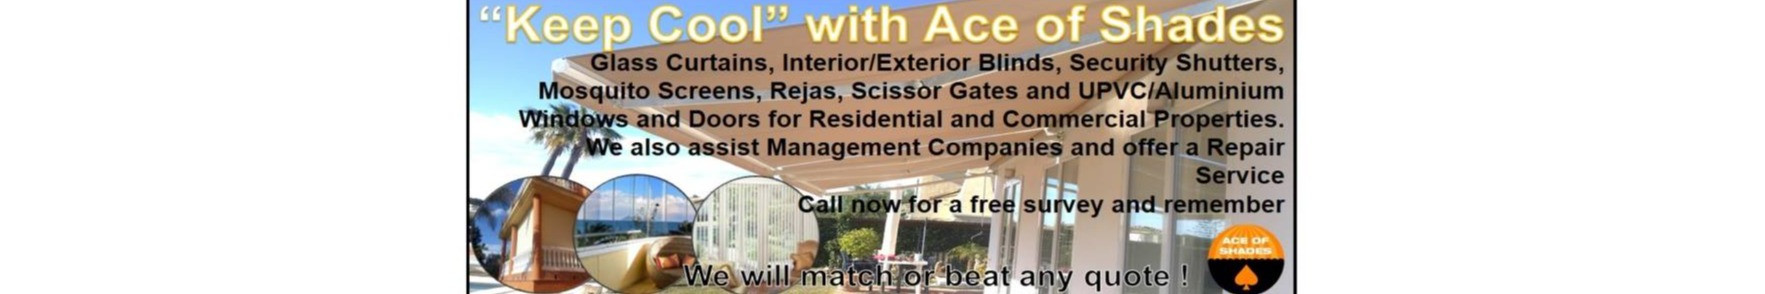 Glass Curtains, Awnings, Interior/Exterior Blinds, Shutters